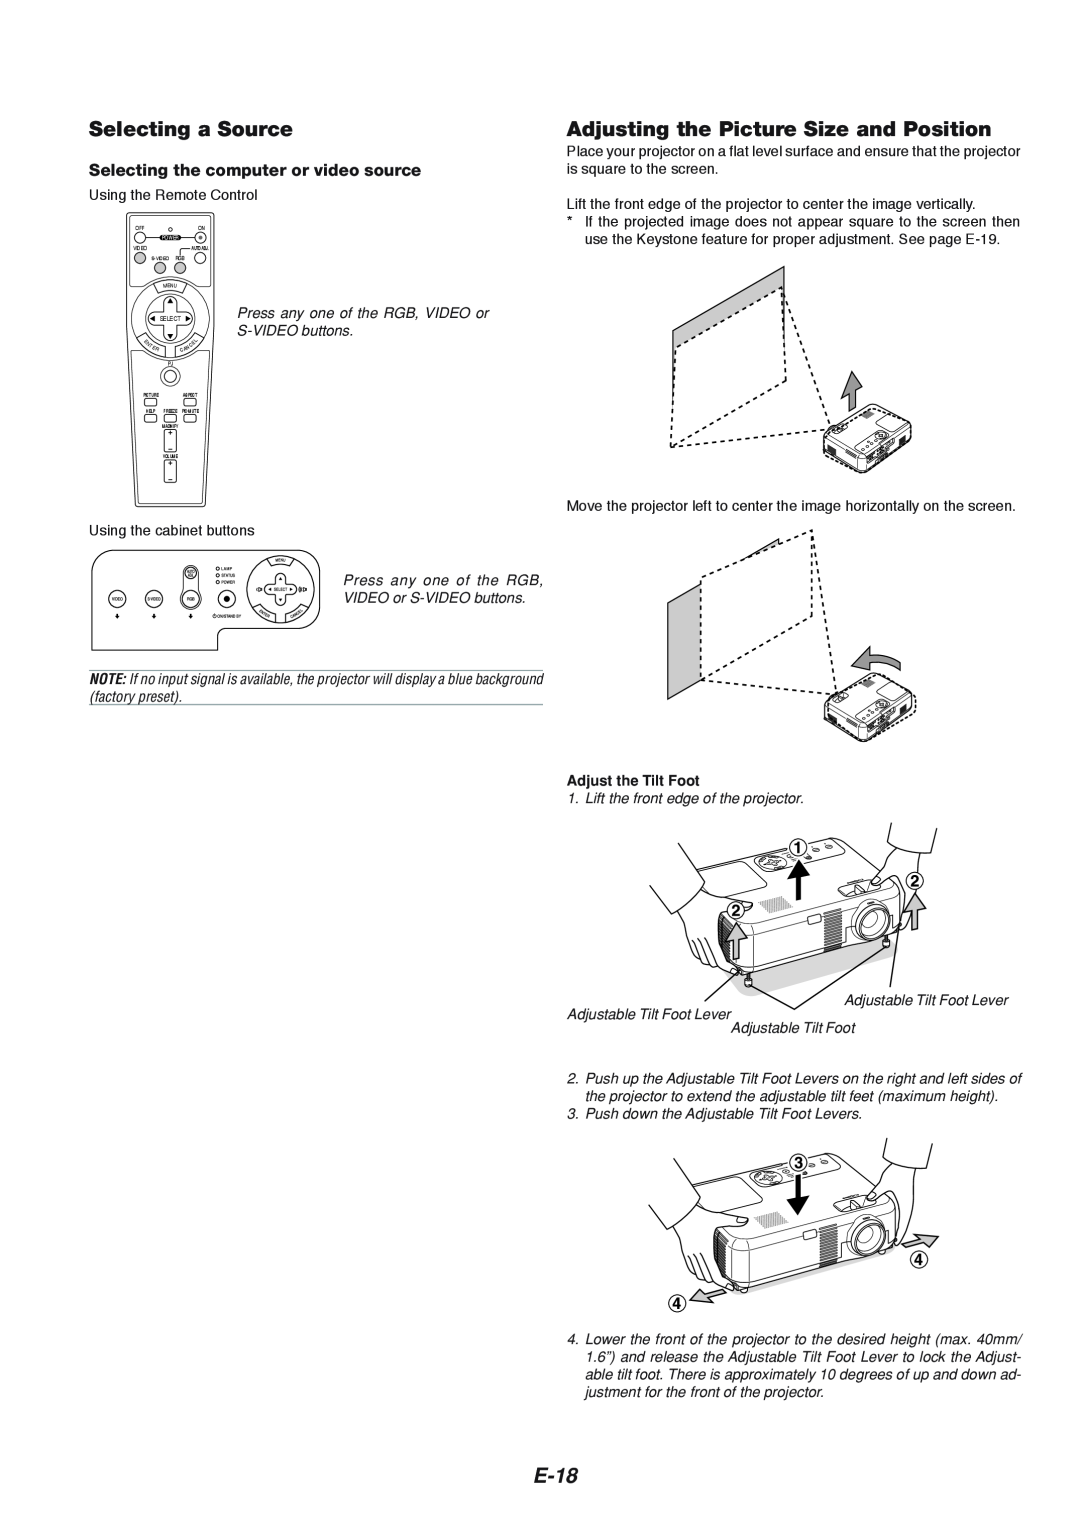 NEC VT660K manual Selecting a Source, Adjusting the Picture Size and Position, E-18, Selecting the computer or video source 